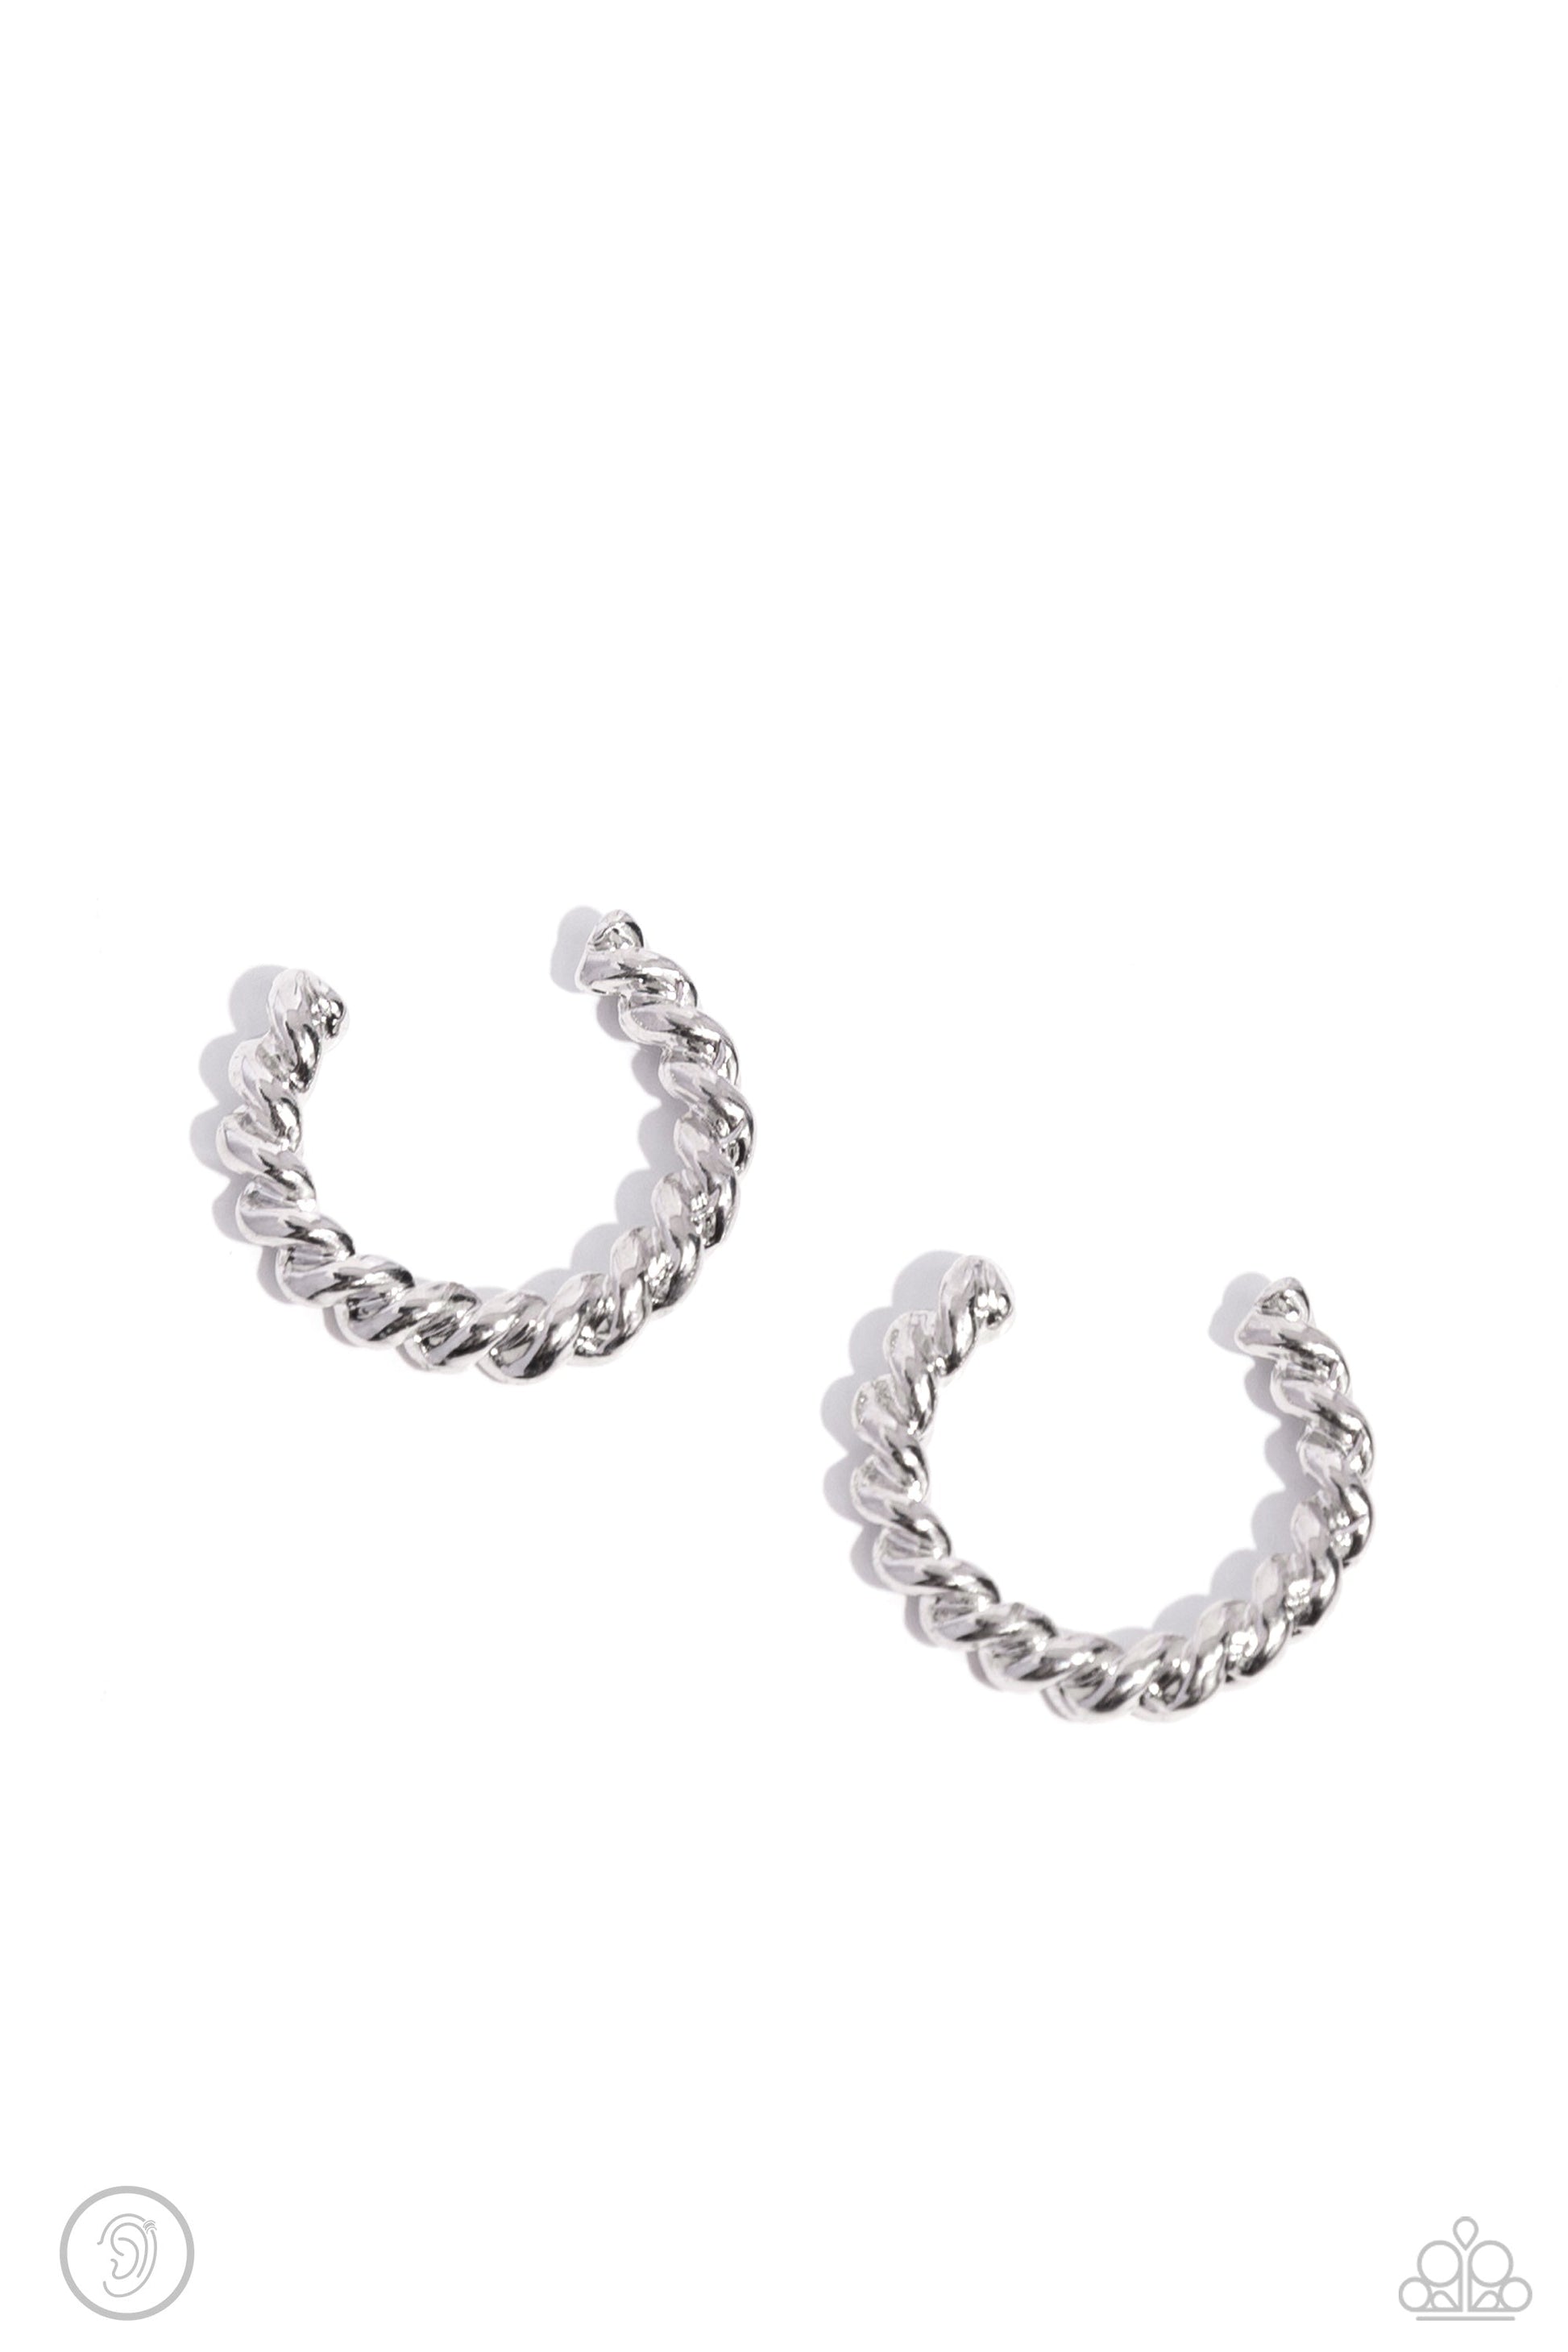 Twisted Travel - Silver Cuff Earrings - Paparazzi Accessories - Featuring a high sheen, a thin bar of silver twists and curves around the ear to create a wreath-like, adjustable, one-size-fits-all cuff. Sold as one pair of cuff earrings.